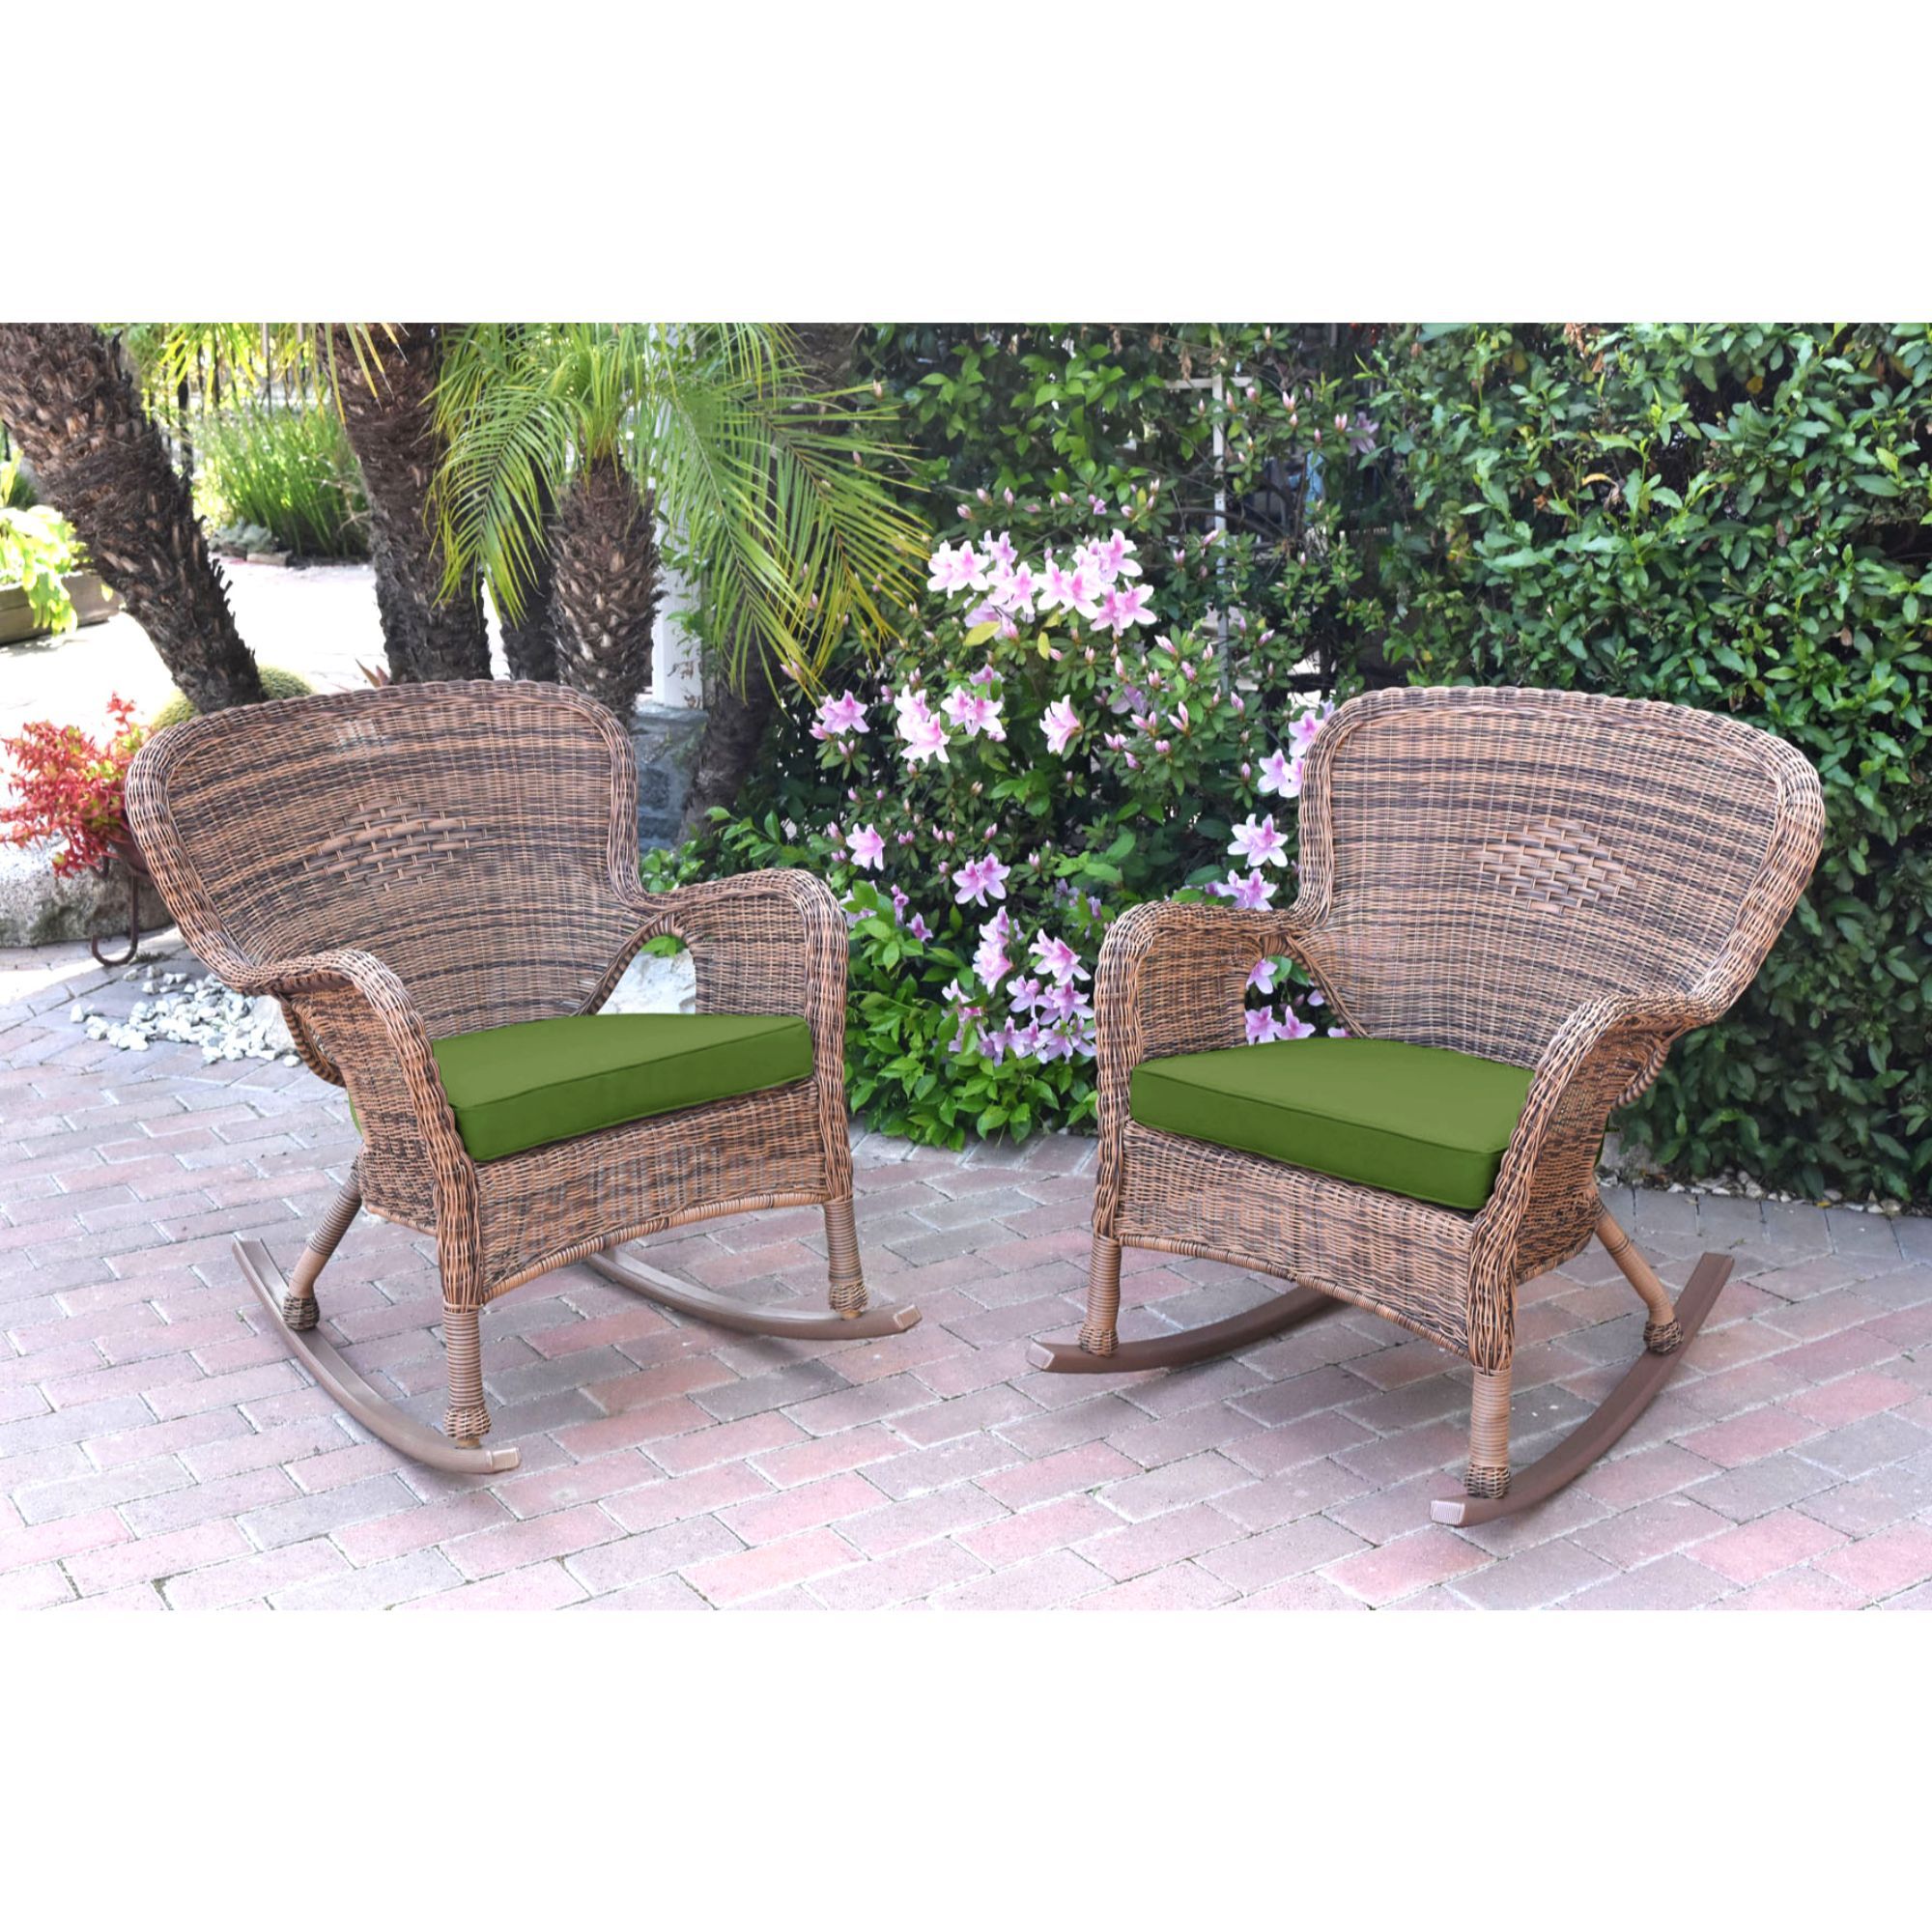 Set Of 2 Brown And Green Windsor Outdoor Patio Wicker Chair And Pertaining To Green Rattan Outdoor Rocking Chair Sets (View 1 of 15)